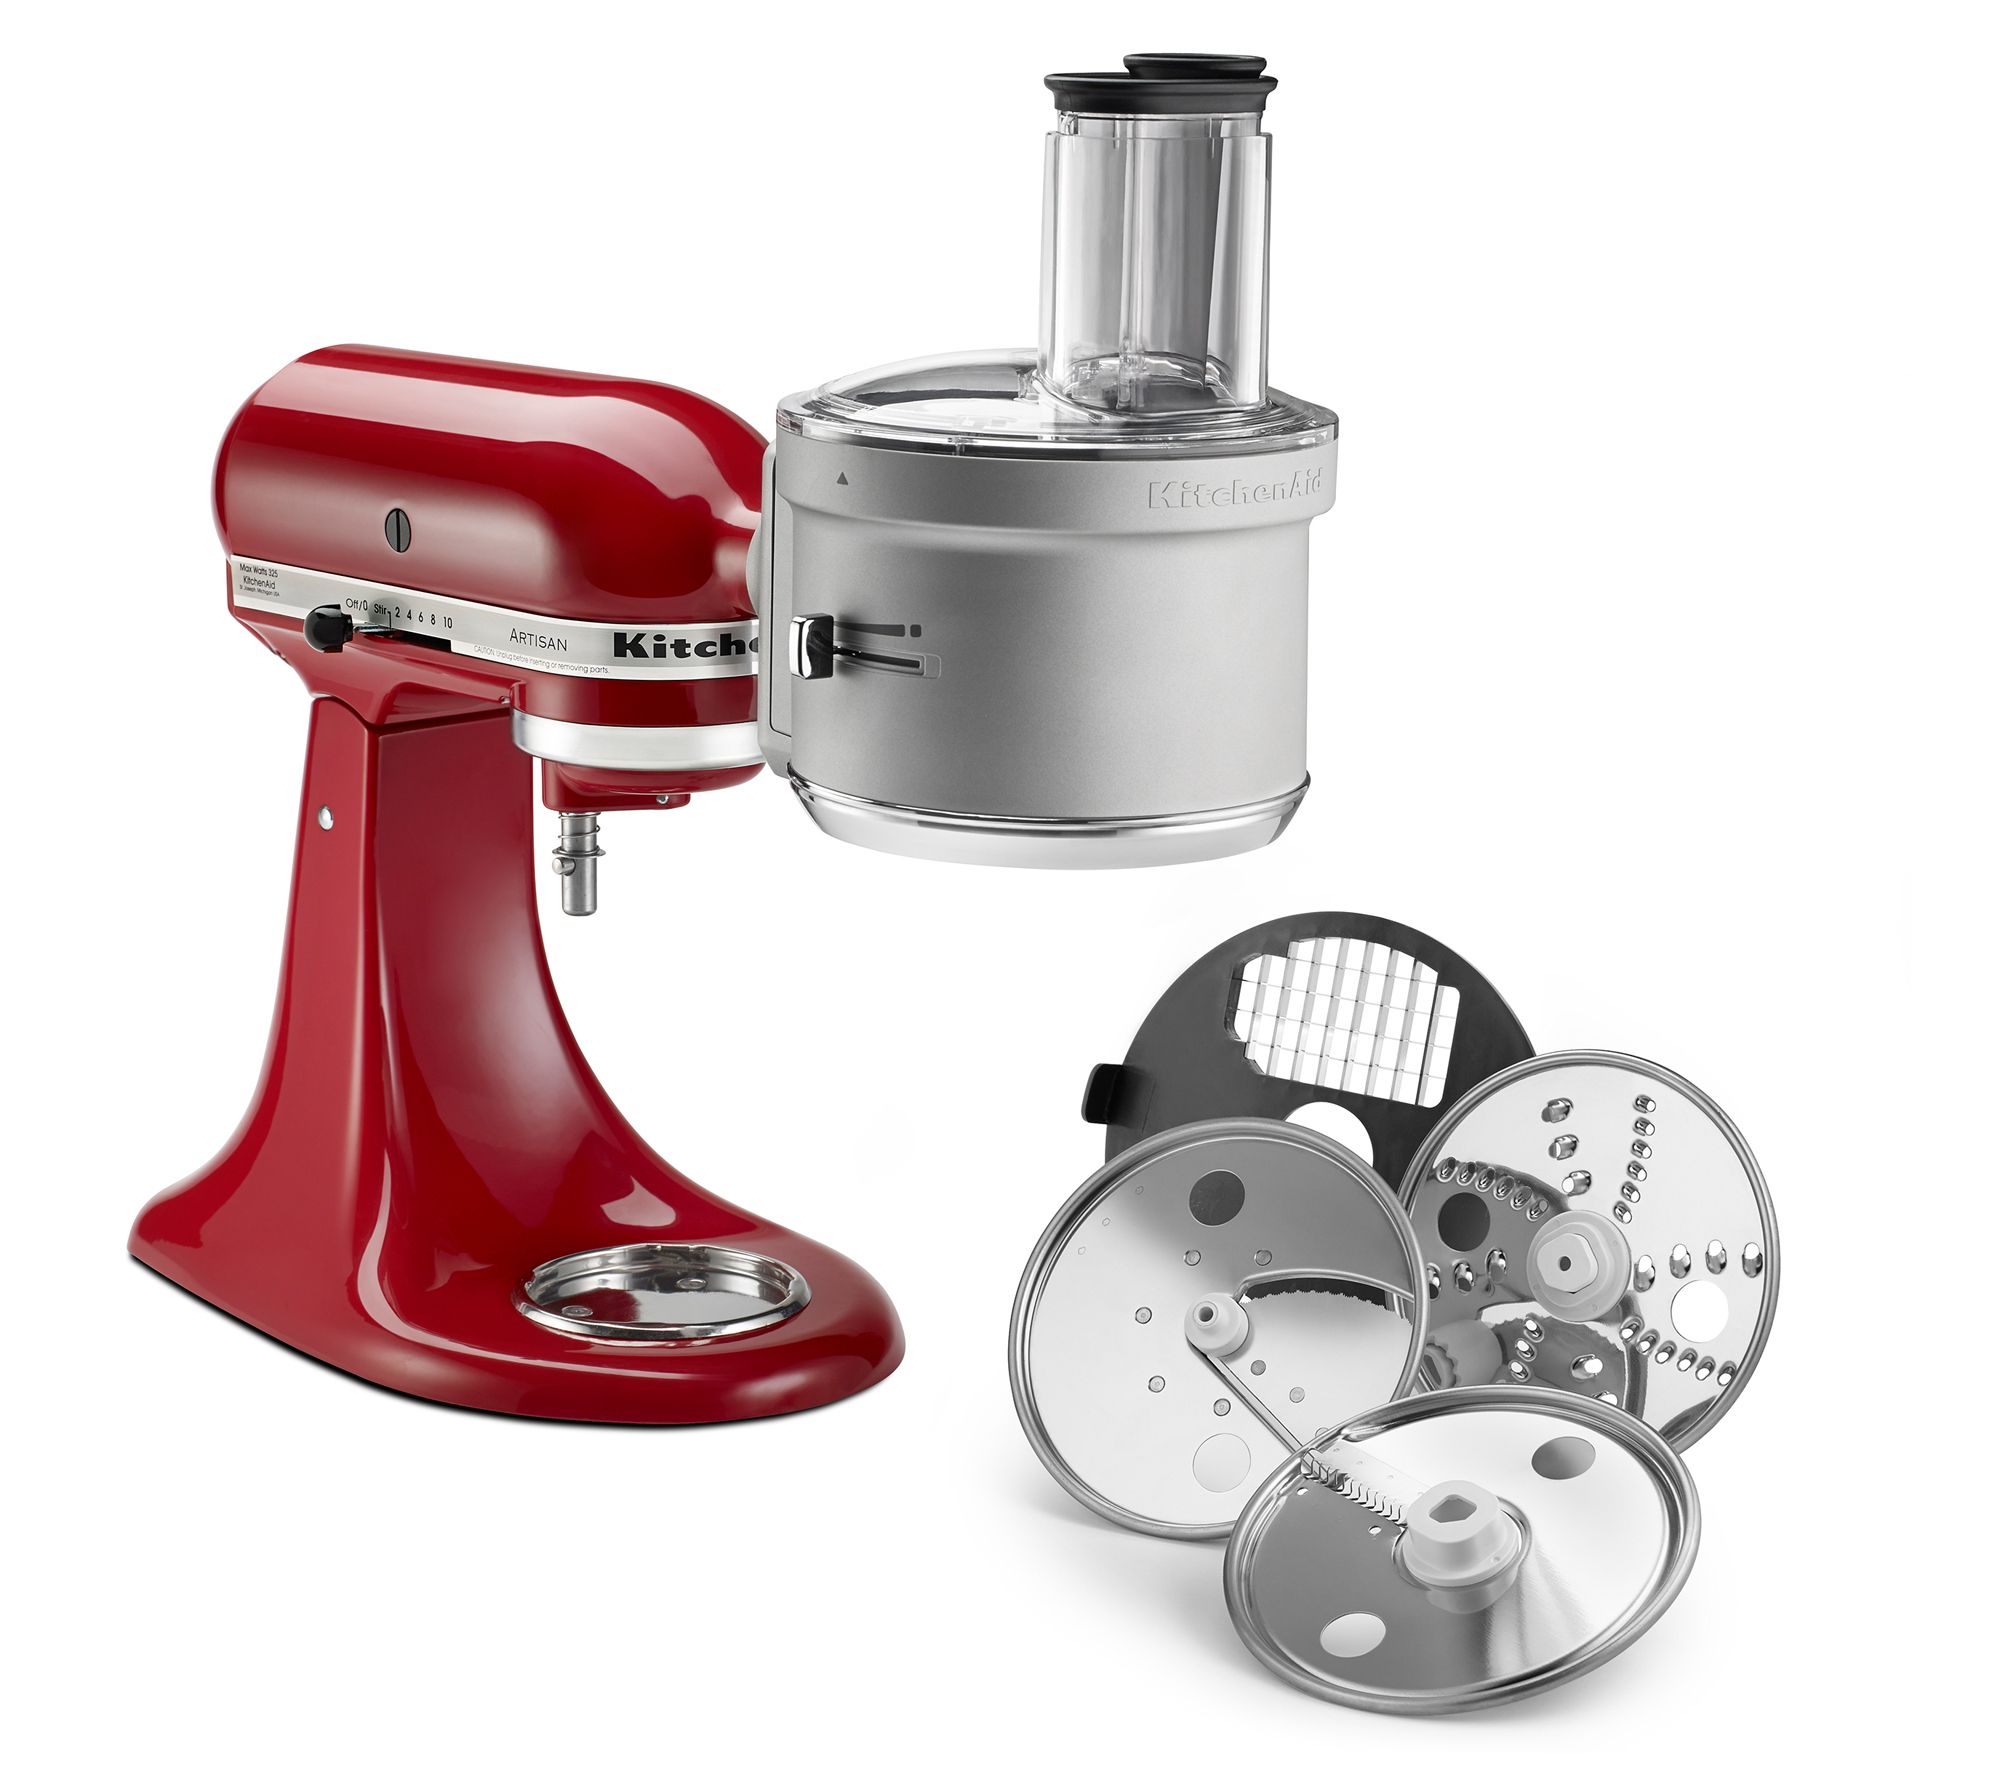 MANUAL FOOD PROCESSOR SET by Pampered Chef By Kiley in Gilbert, AZ -  Alignable